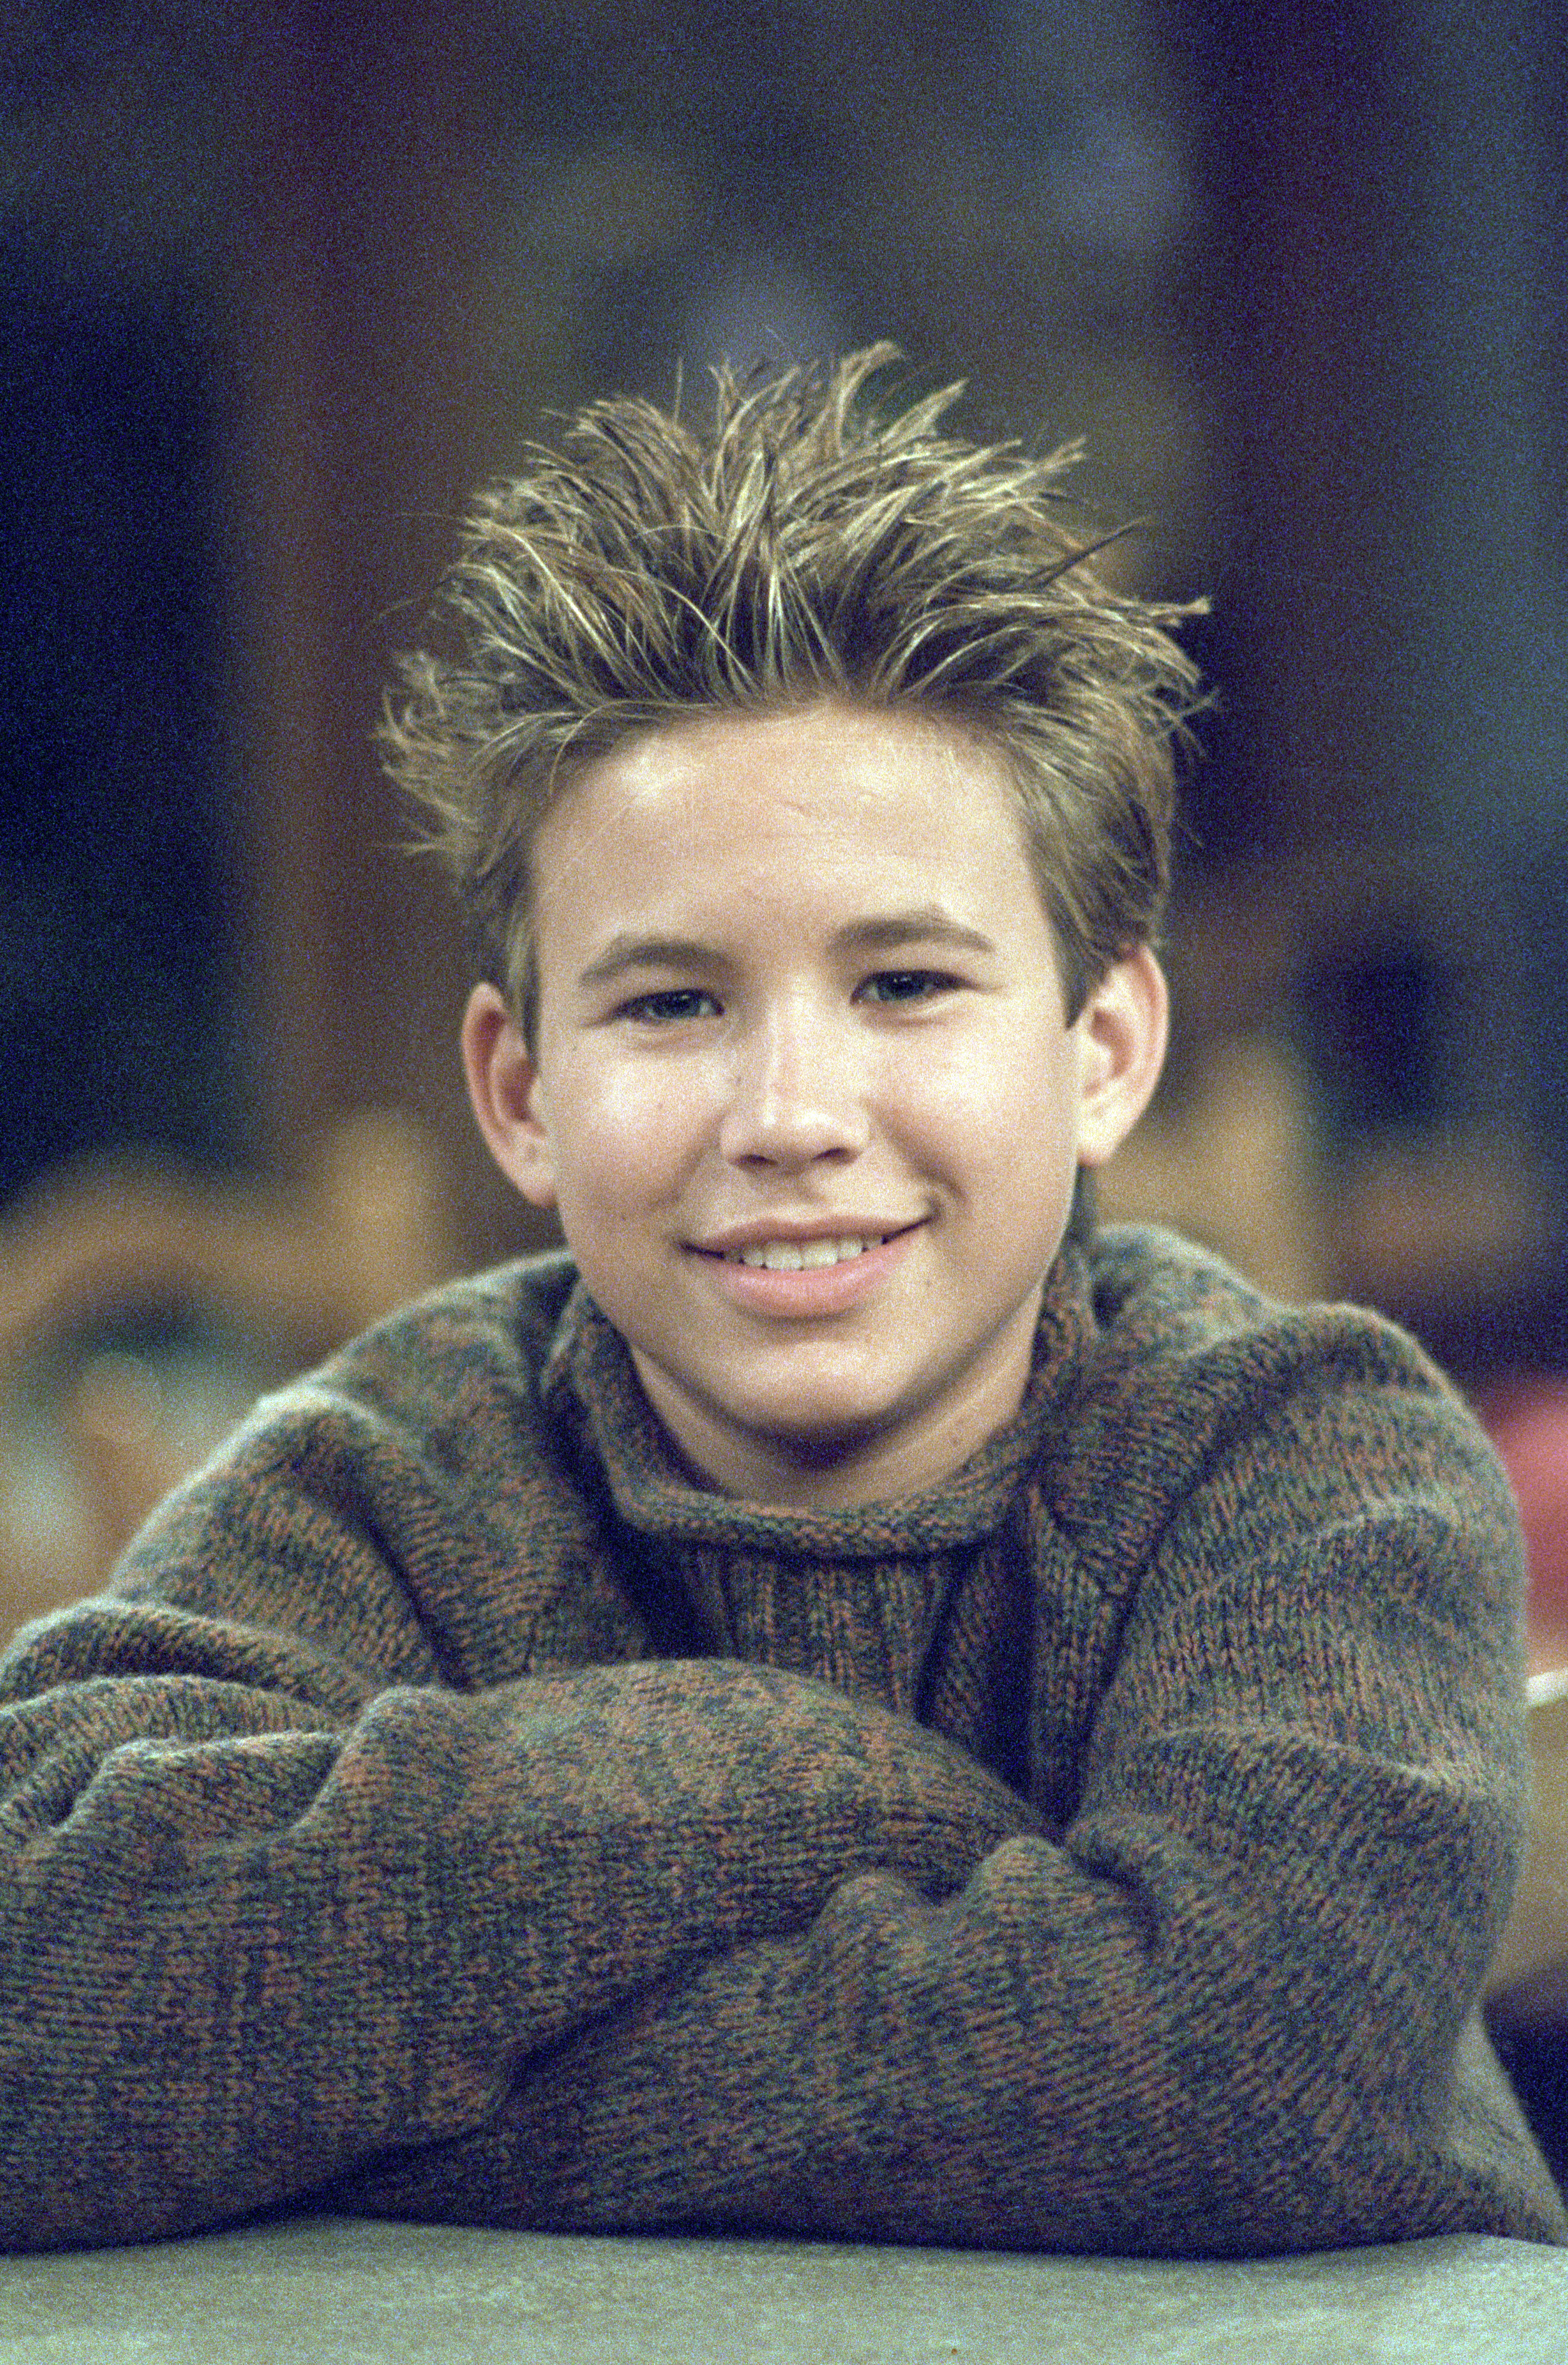 Jonathan Taylor Thomas pictured in "Home Improvement" | Source: Getty Images